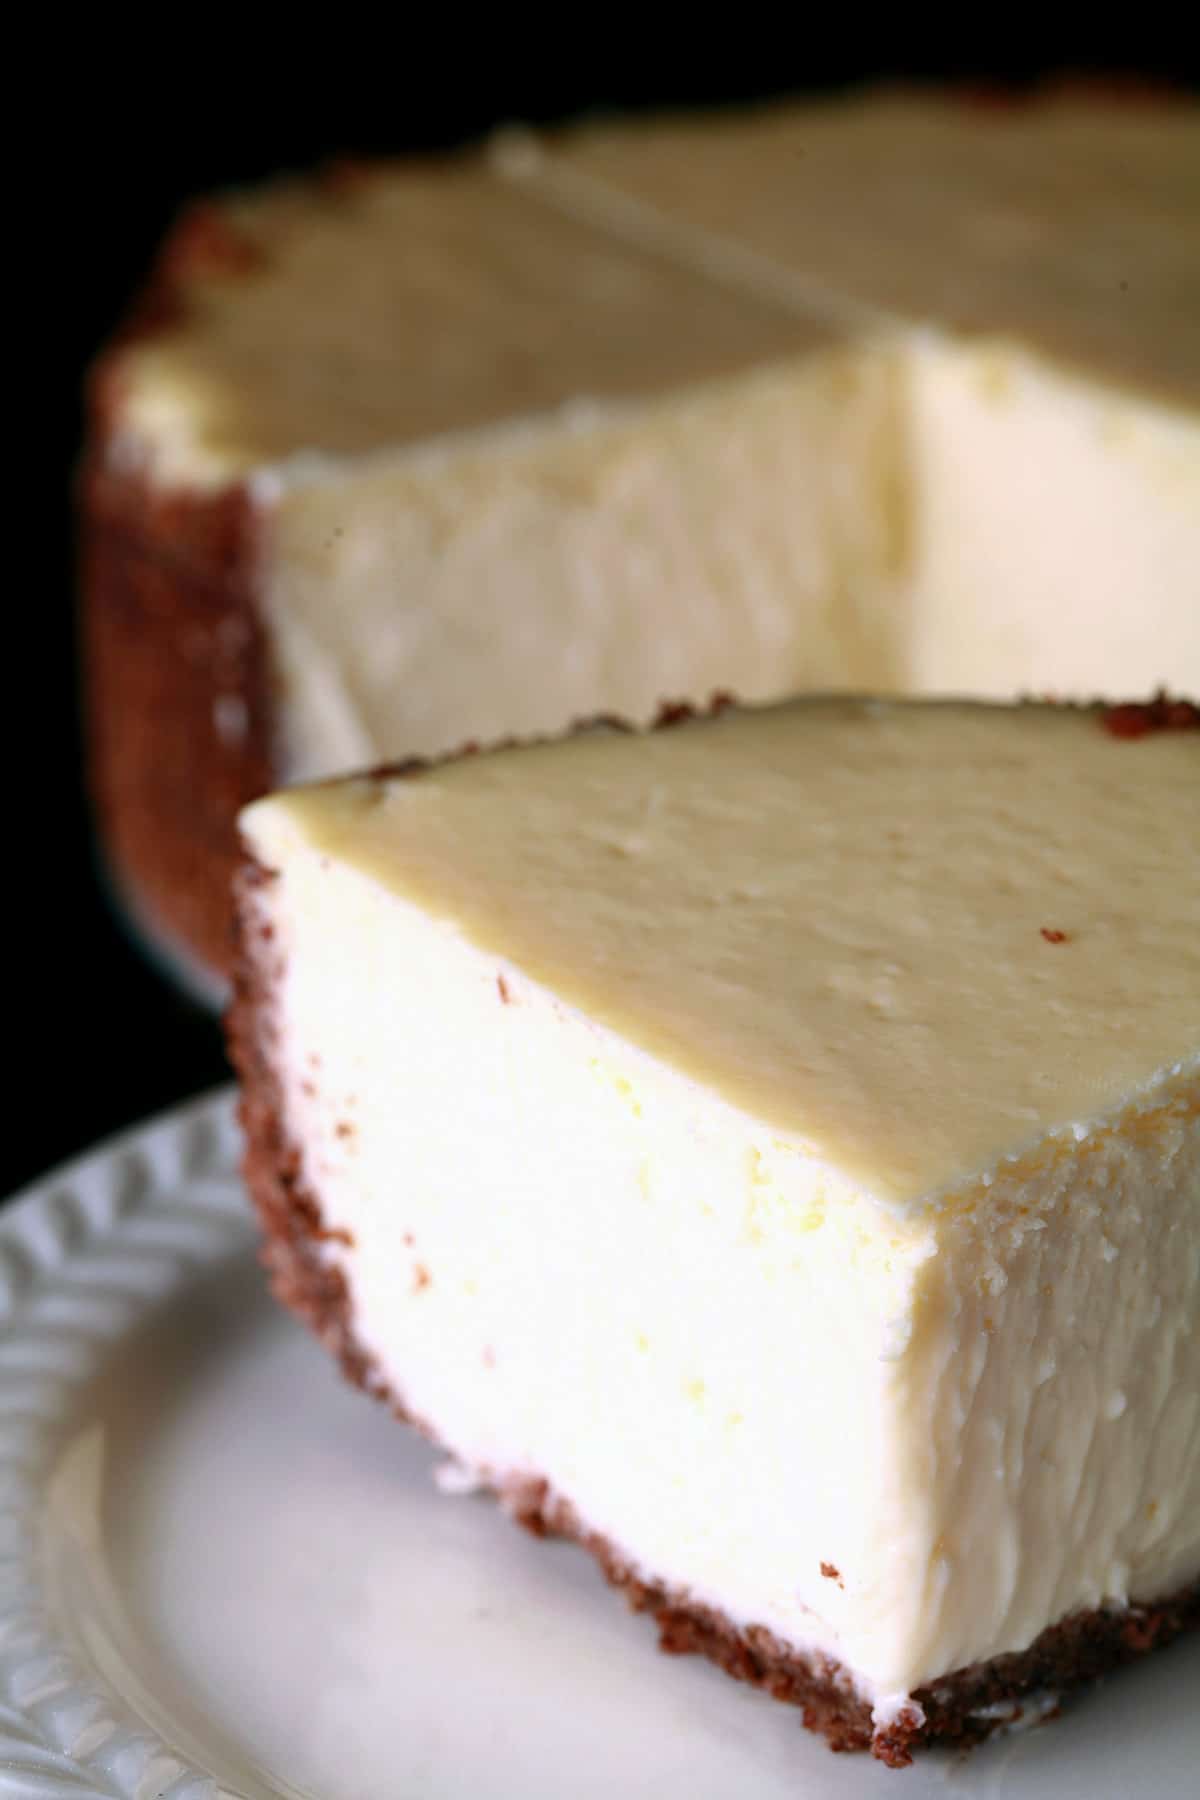 A close up view of a creamy 6 inch vanilla cheesecake.